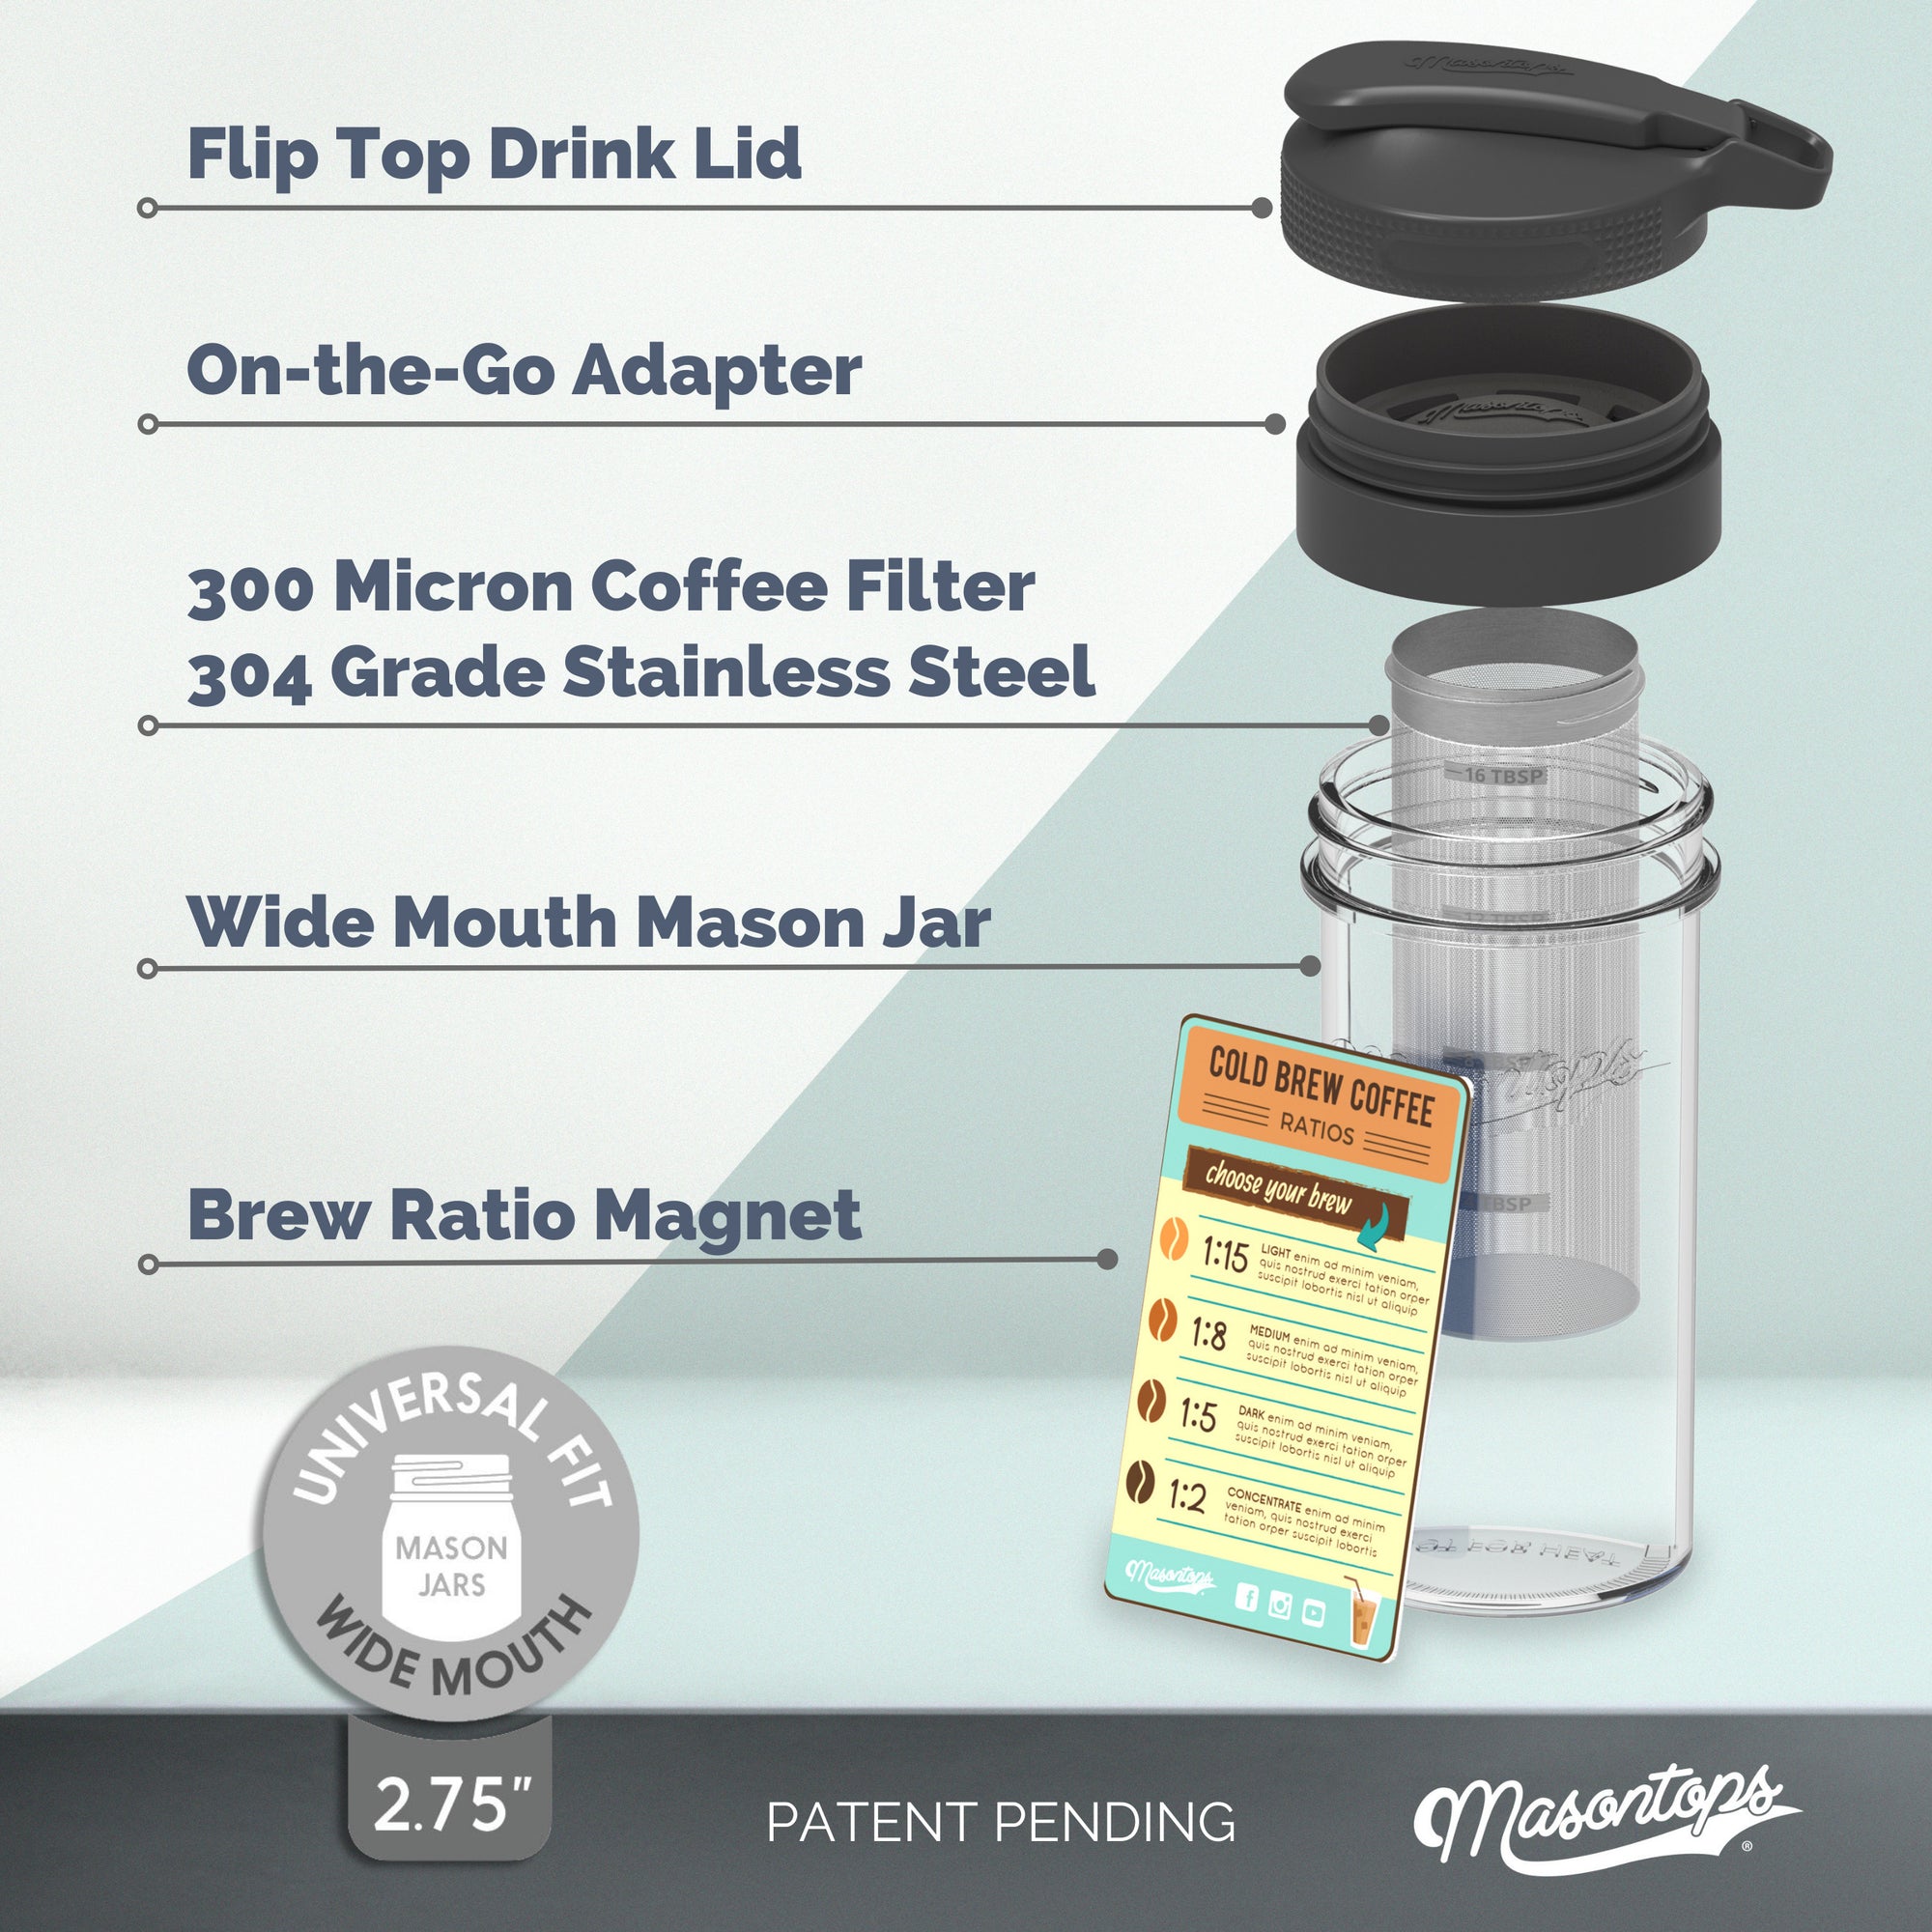 Cold Brew Coffee Maker Kit: Wide Mouth Mason Jar with Screw Top Lid, Stainless Steel Filter for Delicious Brewed Coffee, Infused Tea, Alcohol - 2